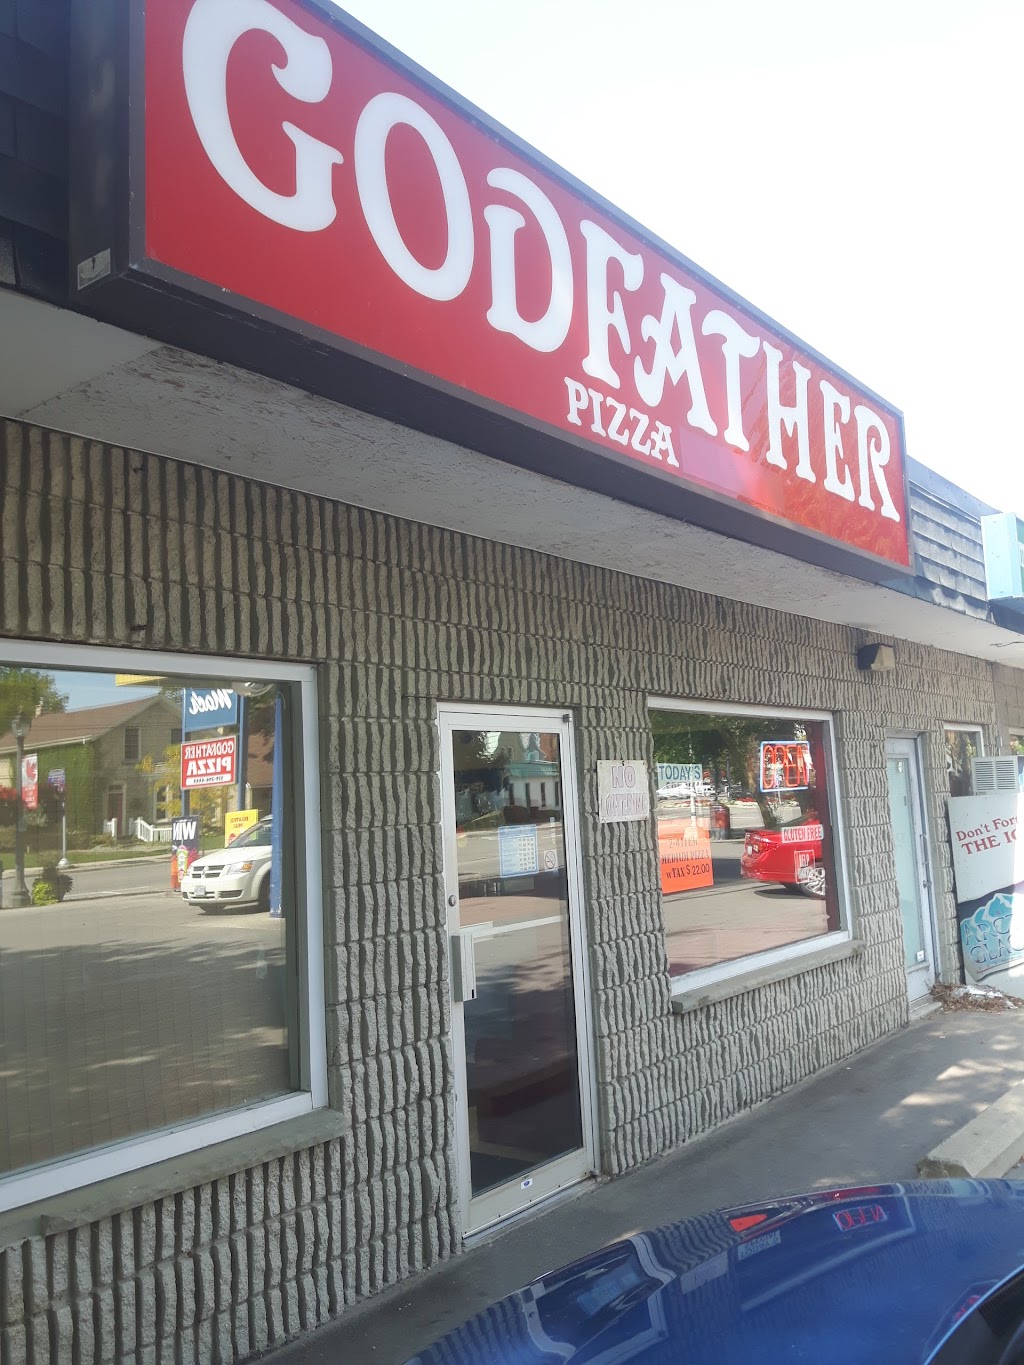 Godfather Pizza | 950 Queen St, Kincardine, ON N2Z 2Y2, Canada | Phone: (519) 396-4444